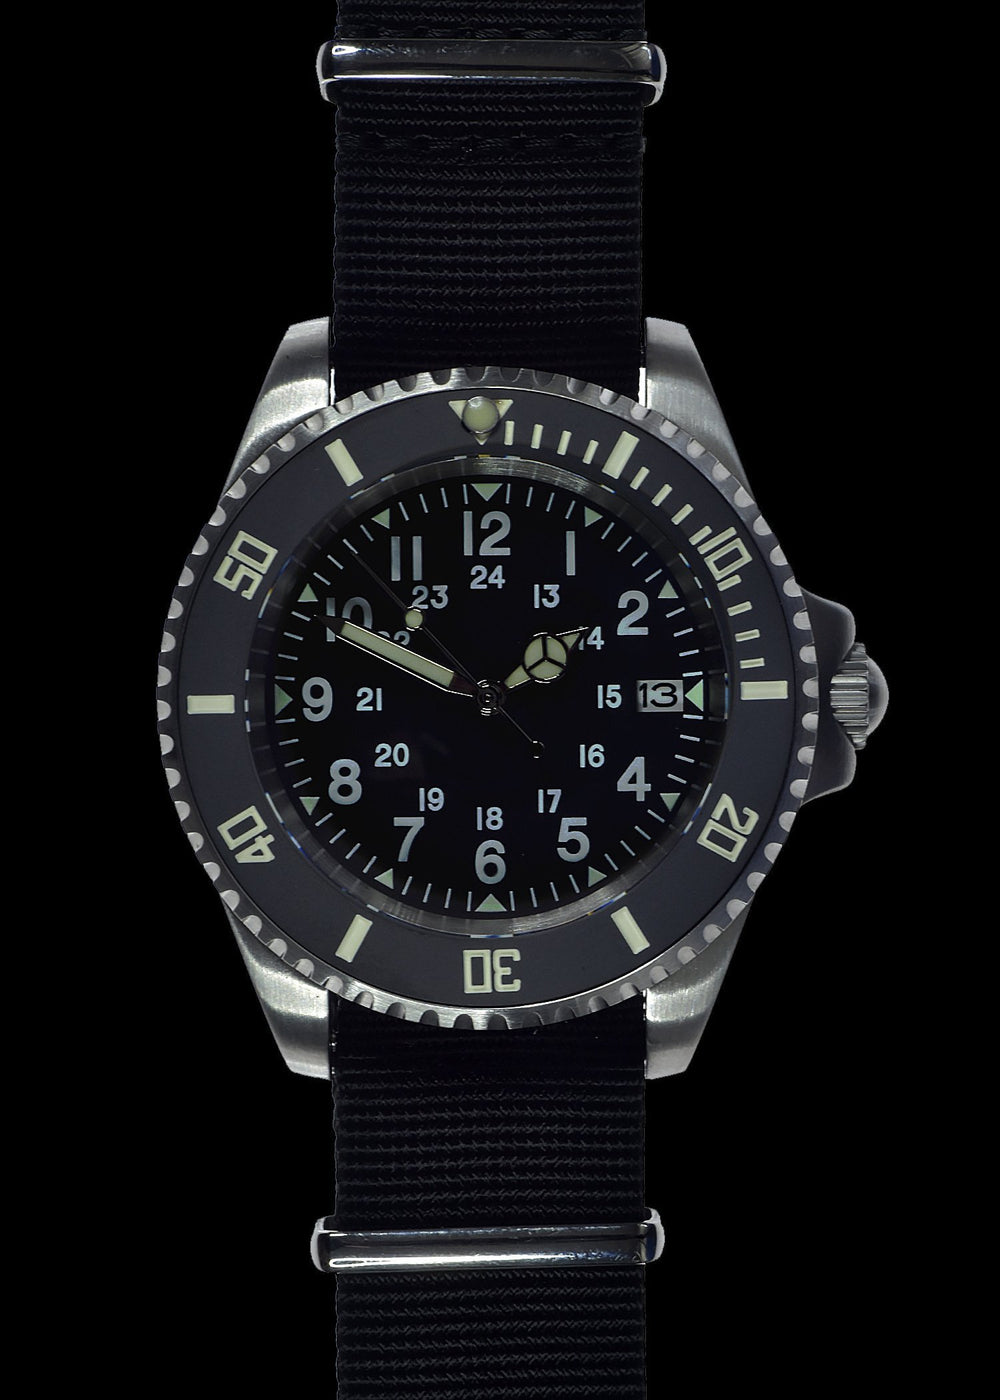 MWC Divers Watch - 24 Jewel U.S Pattern 300m Automatic Military Divers Watch, Sapphire Crystal, Ceramic Bezel on a NATO Webbing Strap